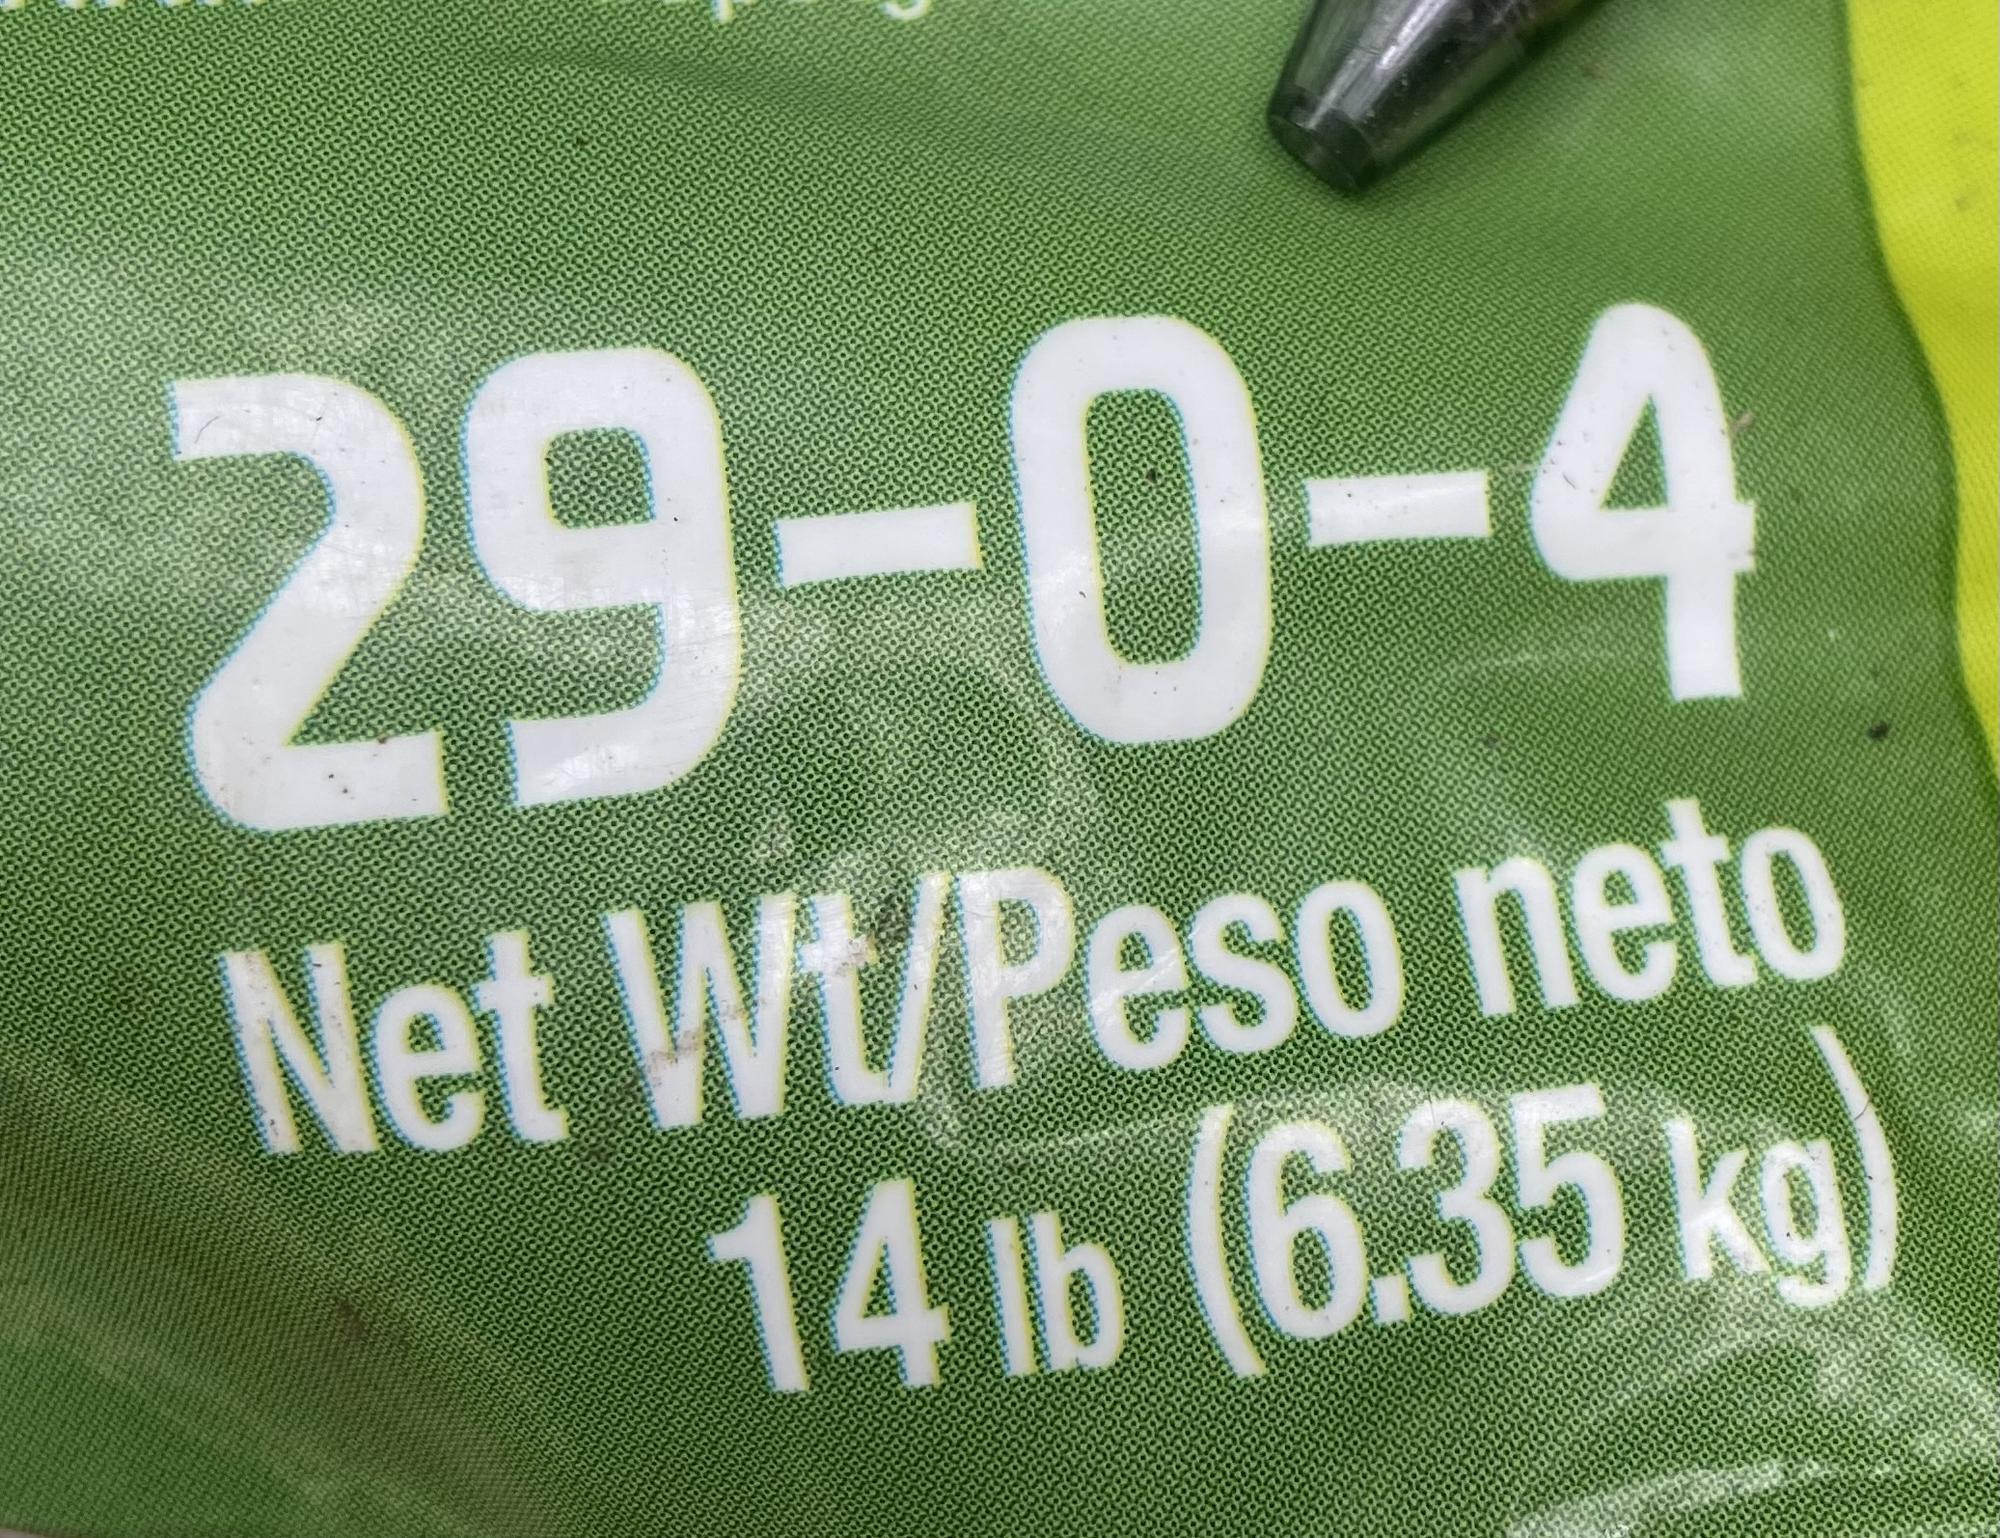 Closeup photo of a green plastic fertilizer bag showing the NPK ratio and net weight in white text.